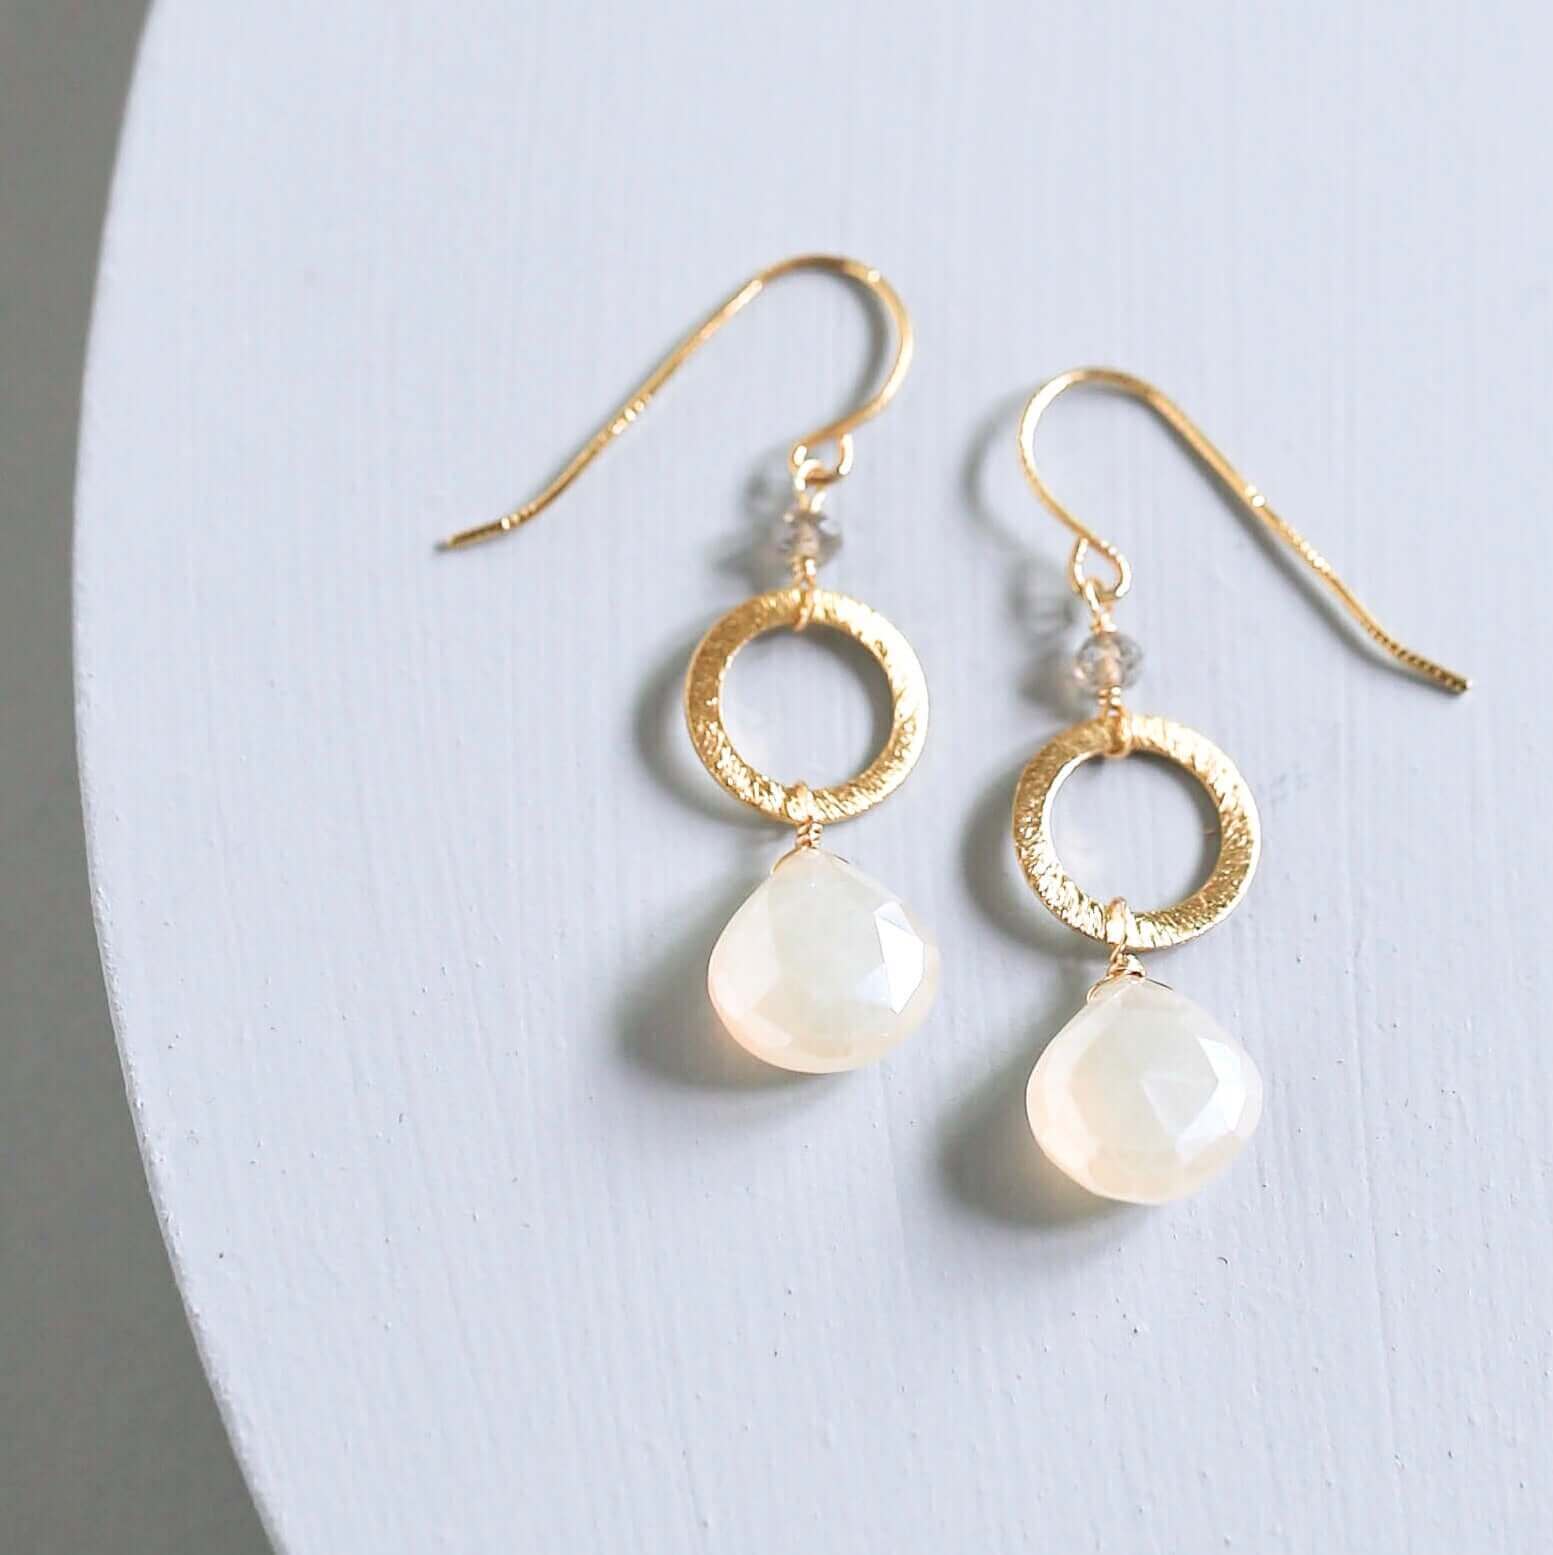 Handmade Gold-Plated Drop Earrings with White Chalcedony